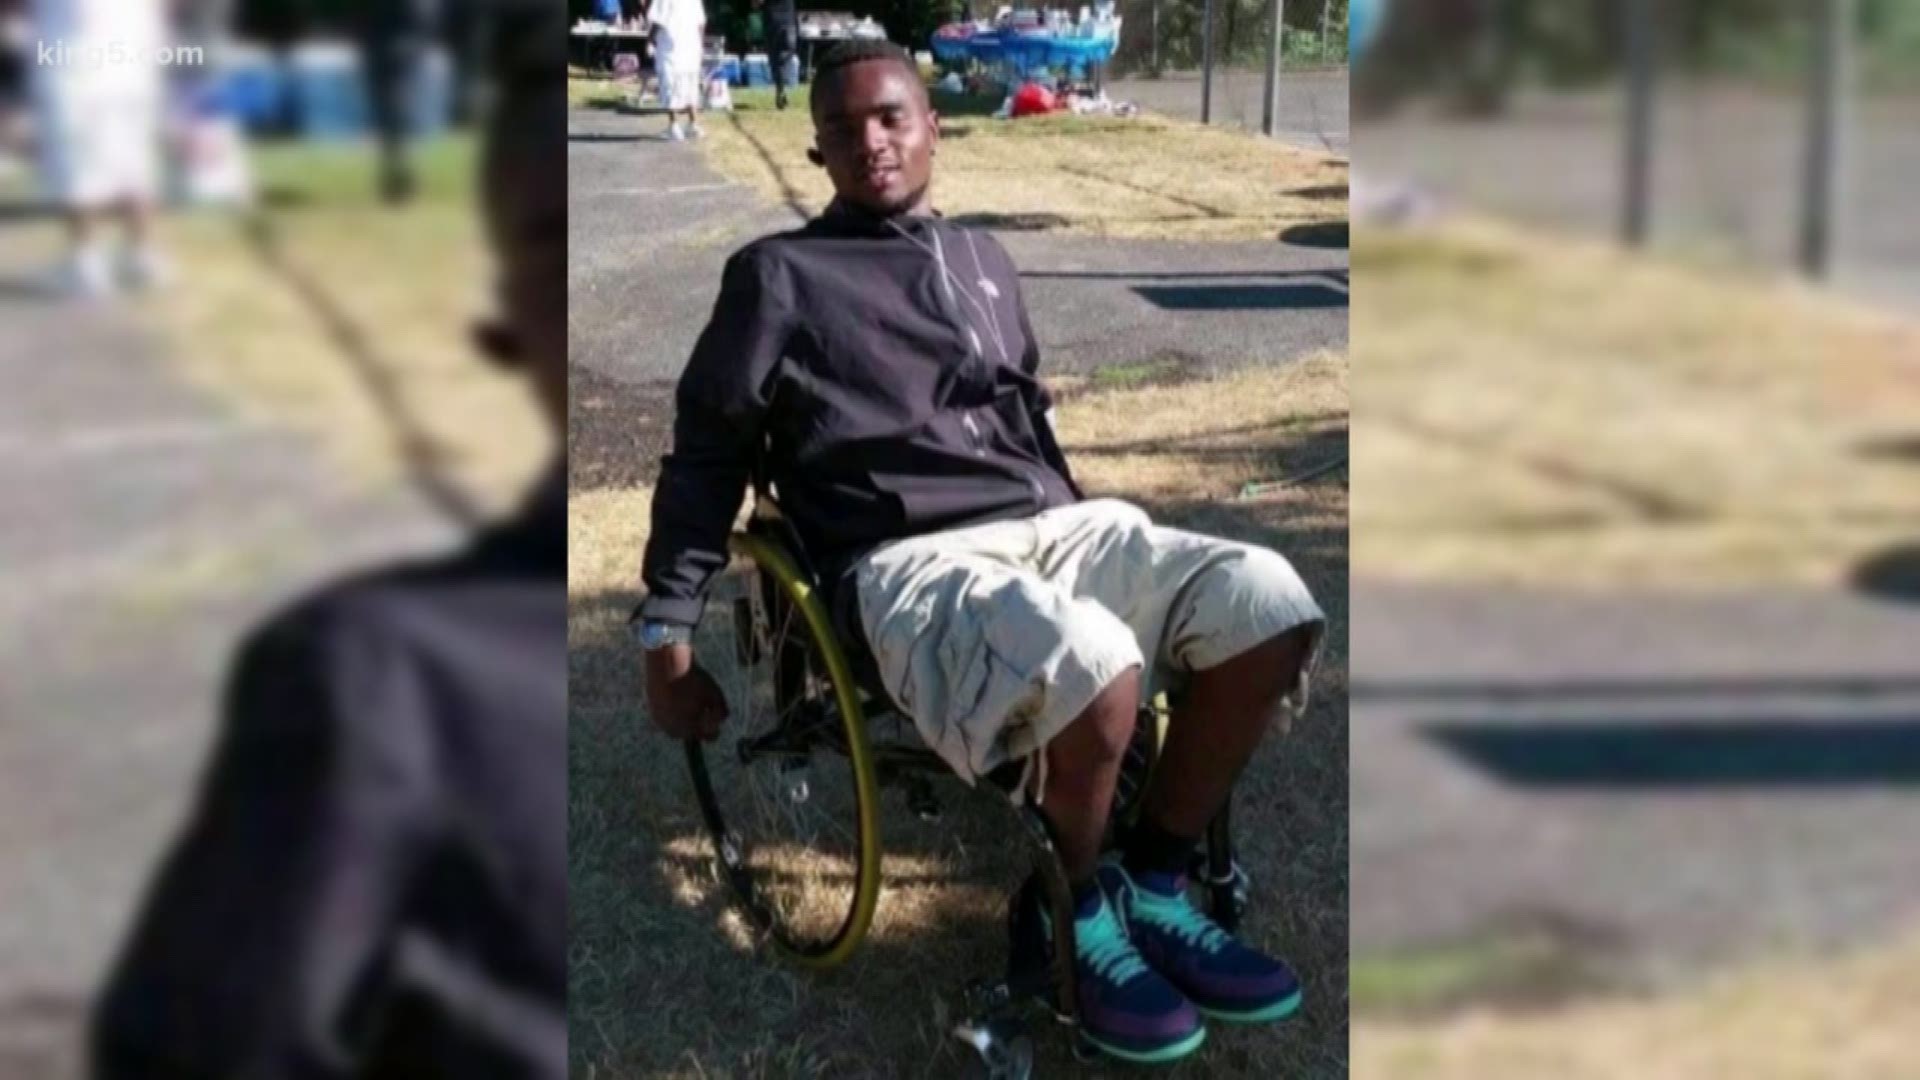 A family is calling for justice after 23-year-old Malik Williams was killed in an officer-involved shooting in Federal Way on Dec. 30.